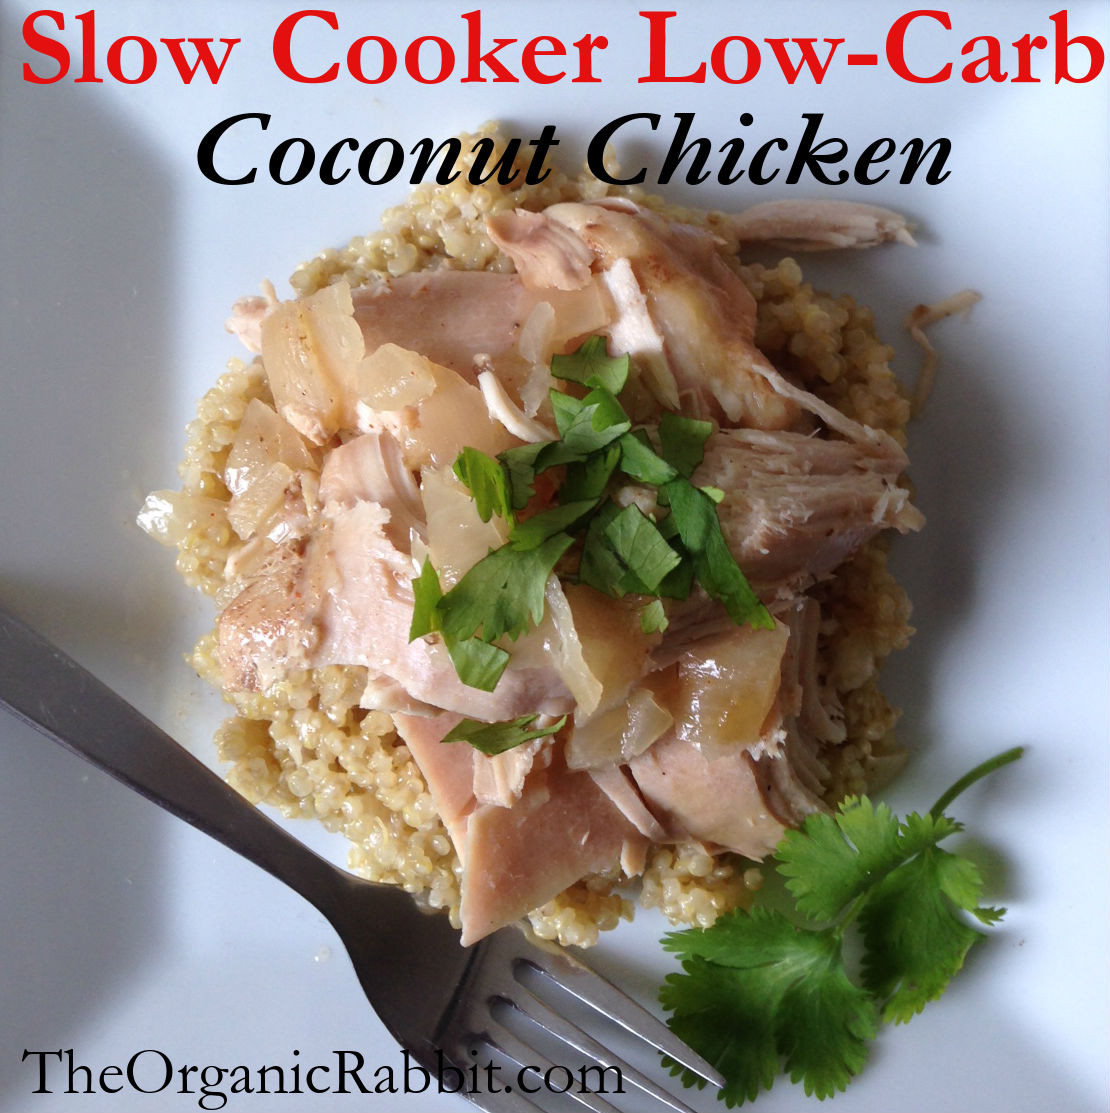 High Protein Low Carb Slow Cooker Recipes
 paleo low carb protein coconut chicken slow cooker weight